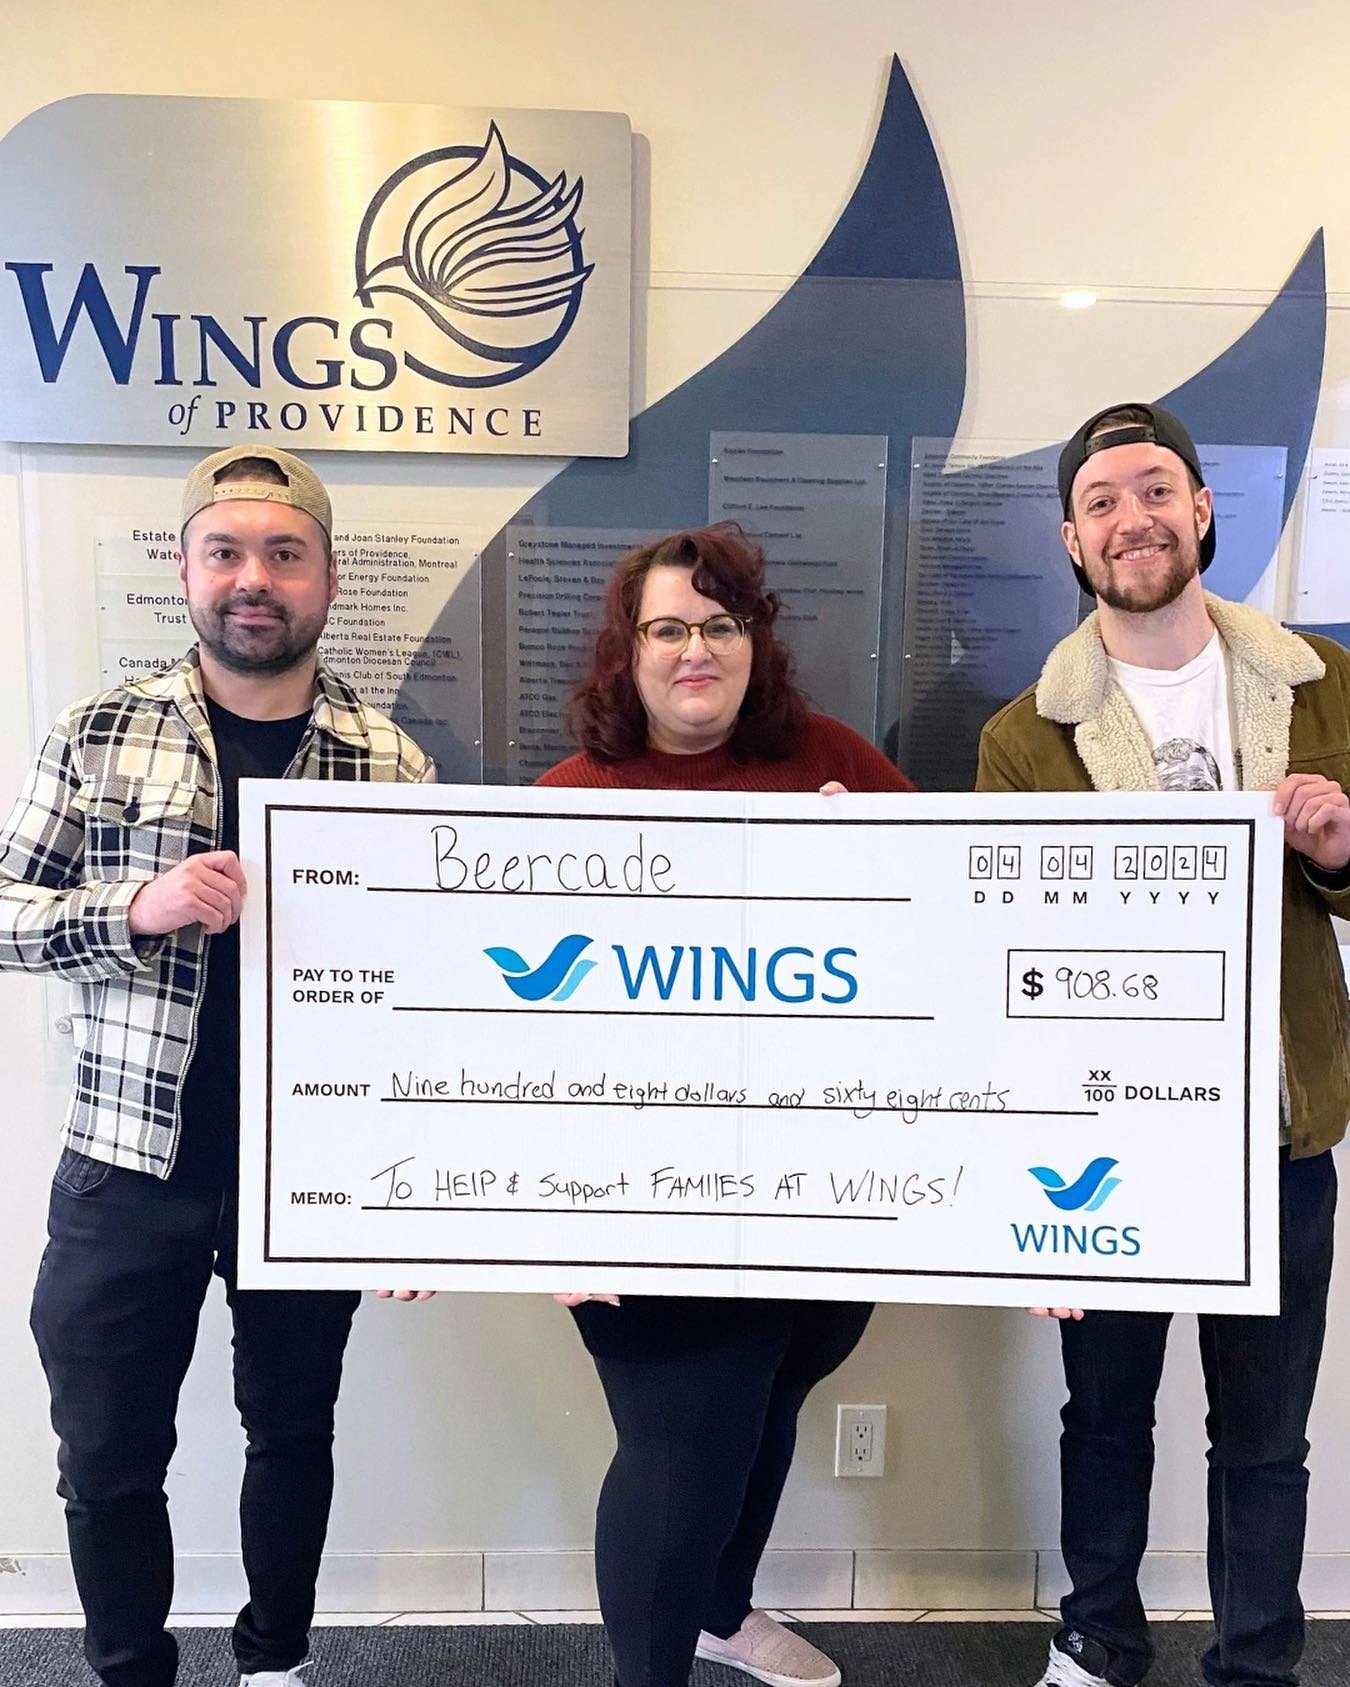 We would like to give a big thank you to @beercadewhyte for raising over $900 for WINGS at their International Women&rsquo;s Day event in March! 

Thank you for helping to raise awareness in our community about domestic violence supports, and for don